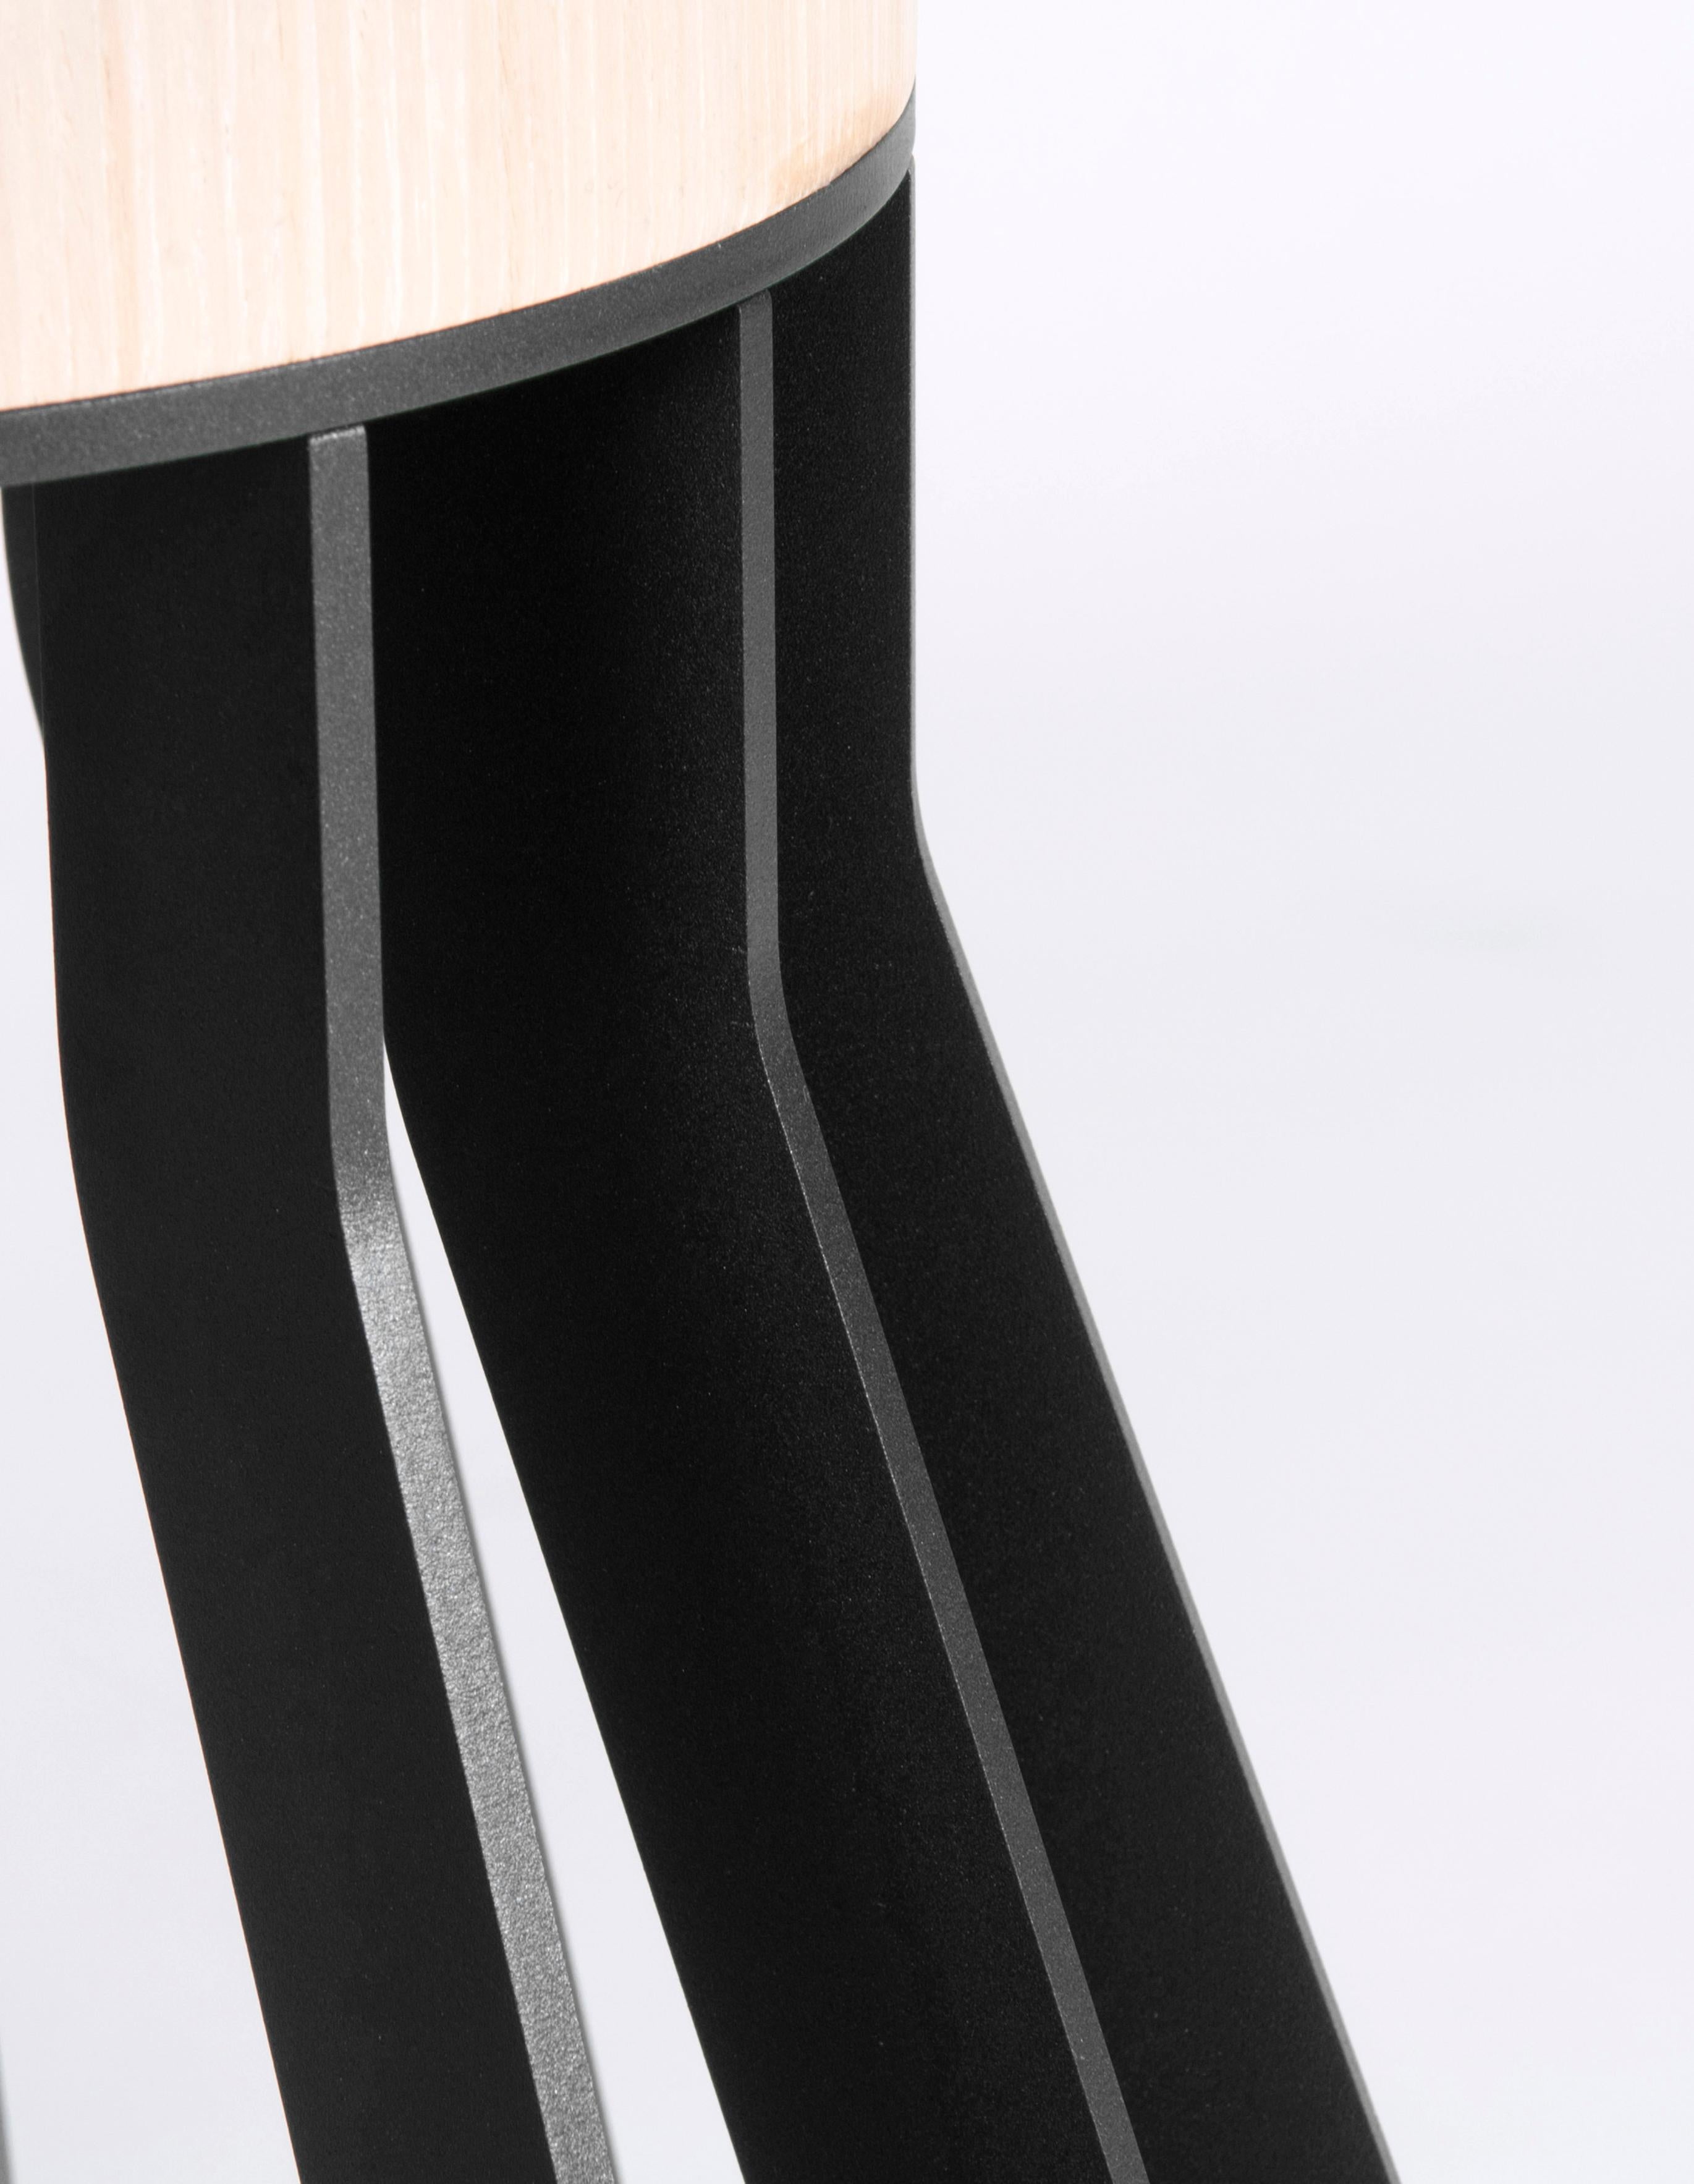 French Mewoma Dining Table, Black Legs Black Top by Jonah Takagi for La Chance For Sale